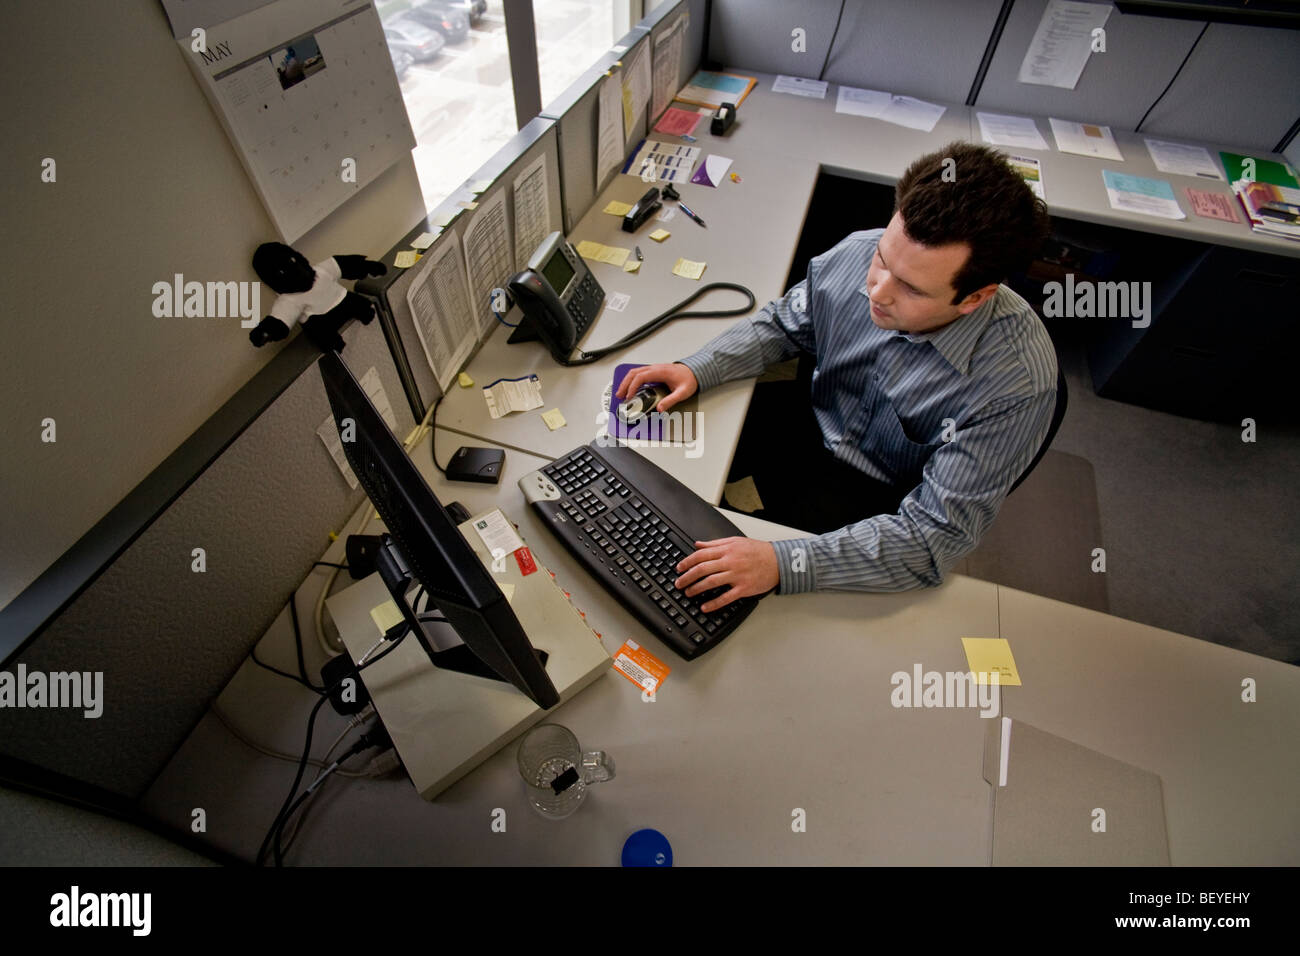 At an Irvine, California financial consultation firm, a financial researcher works at his workstation computer. Stock Photo